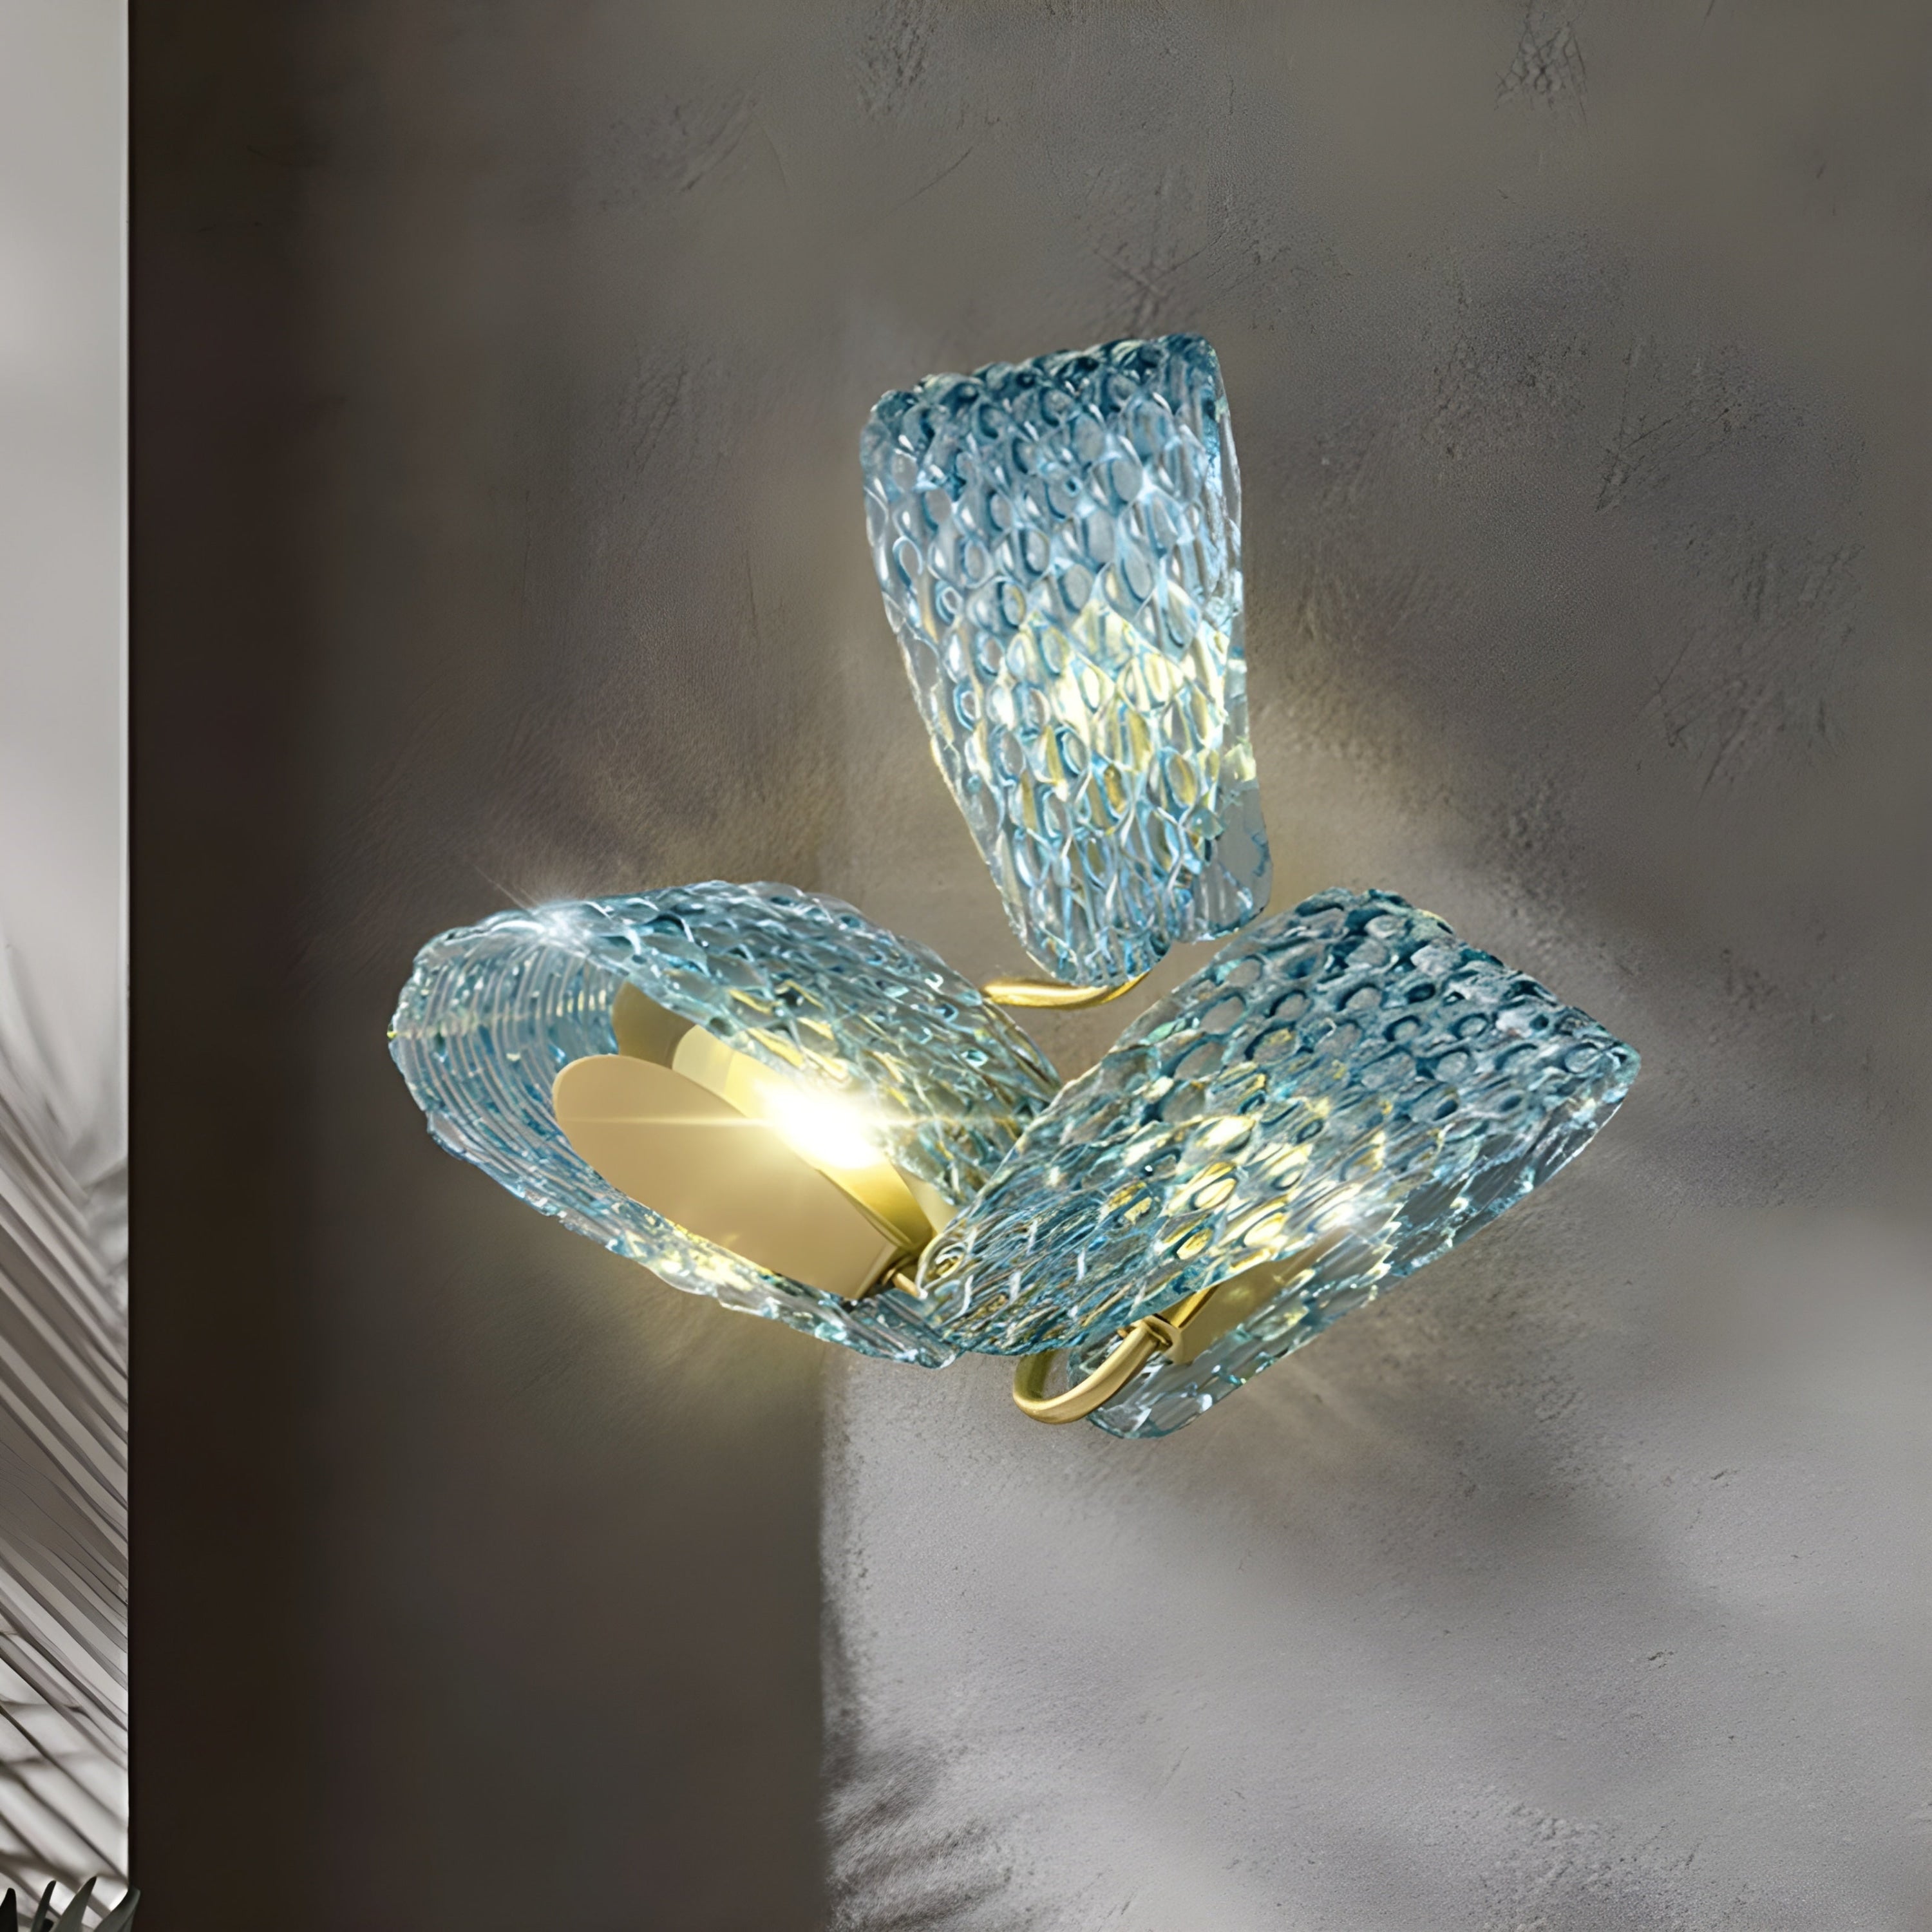 Blue Crystal Bows Wall Light Fixtures | Luxury Lamp For Living Room Dining Hotel - Modern Sconces